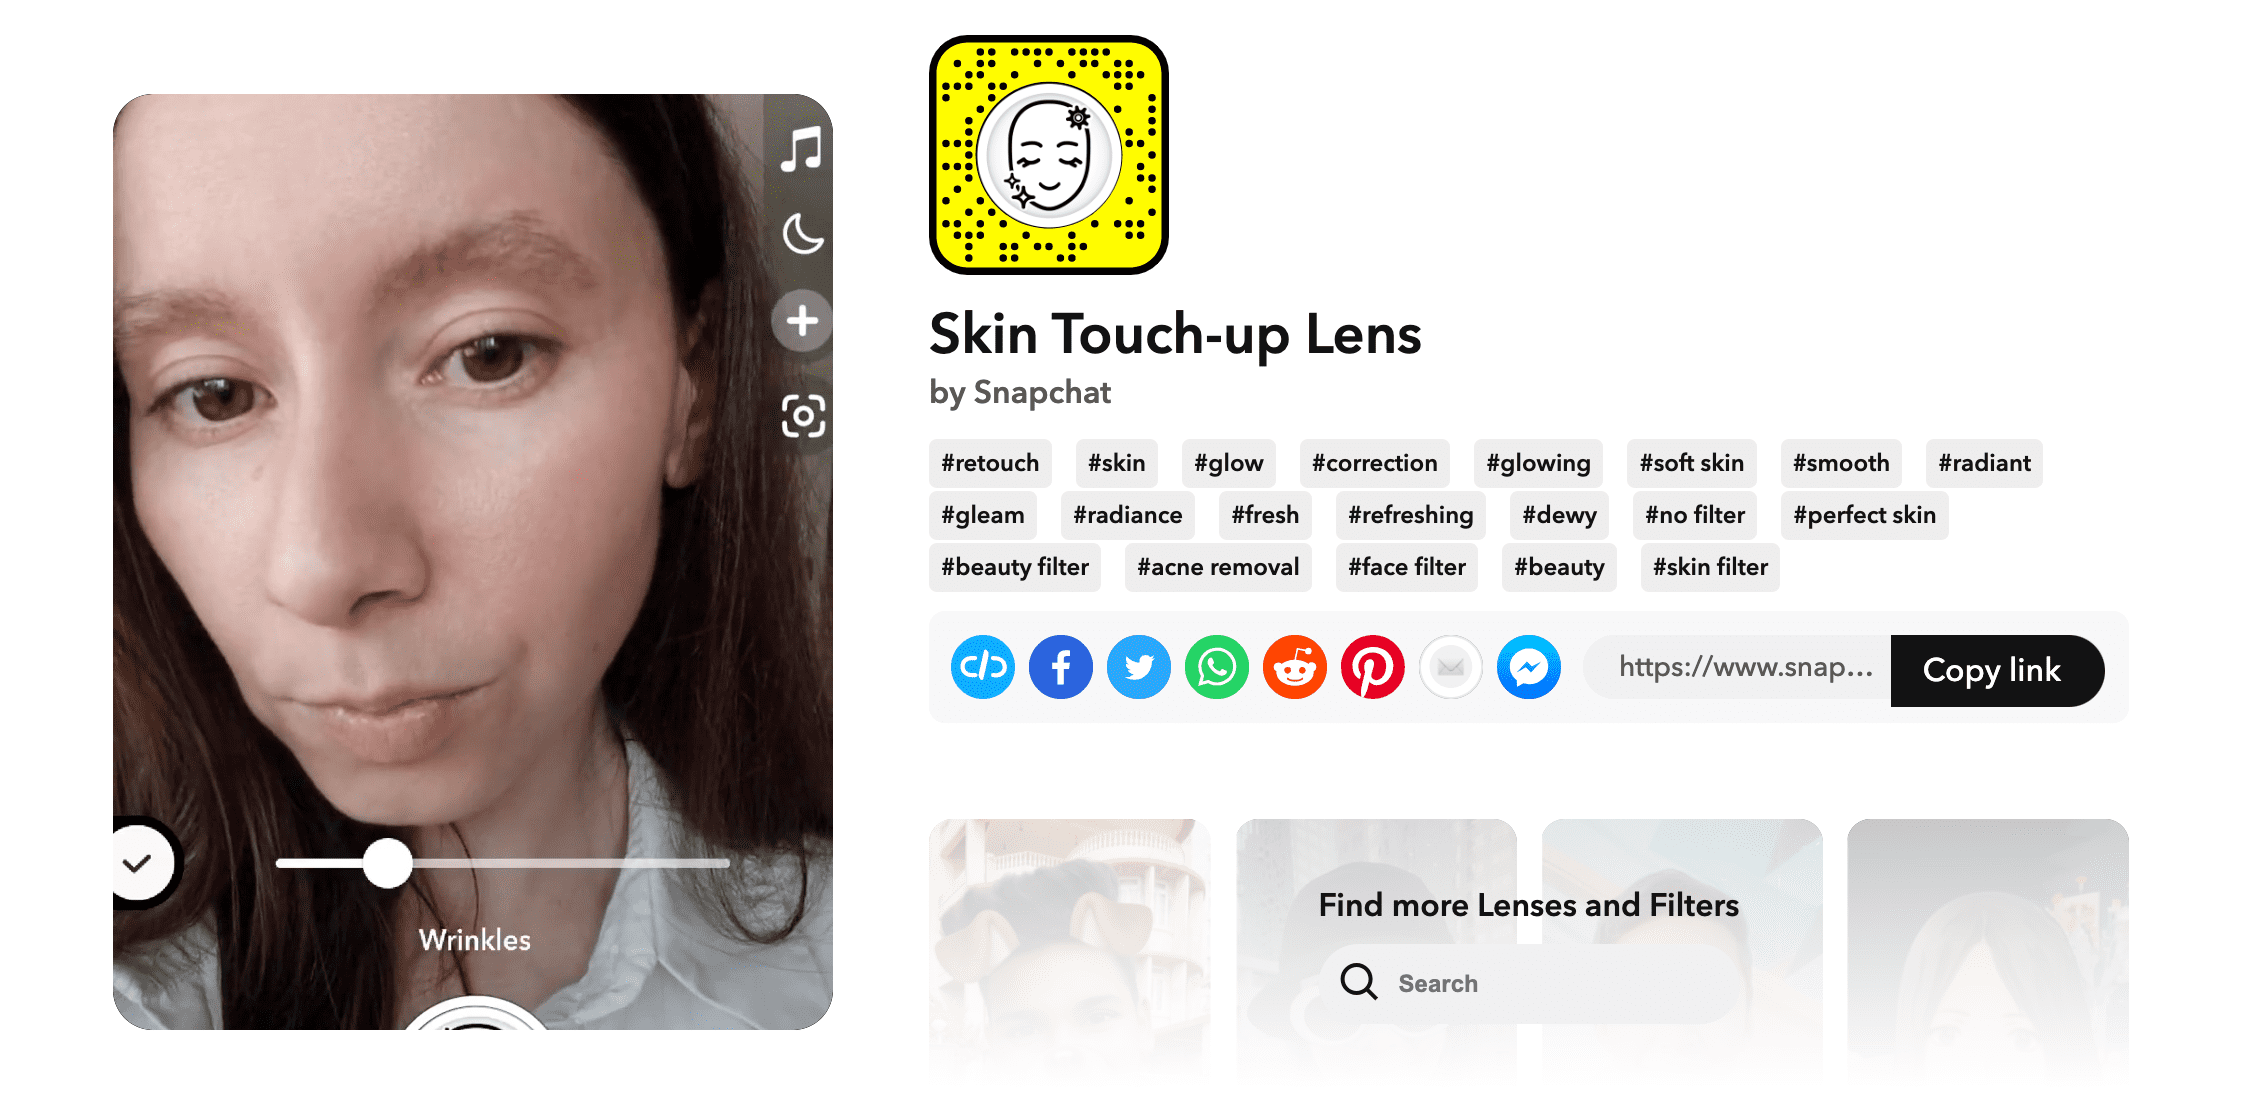 Skin Touch-up